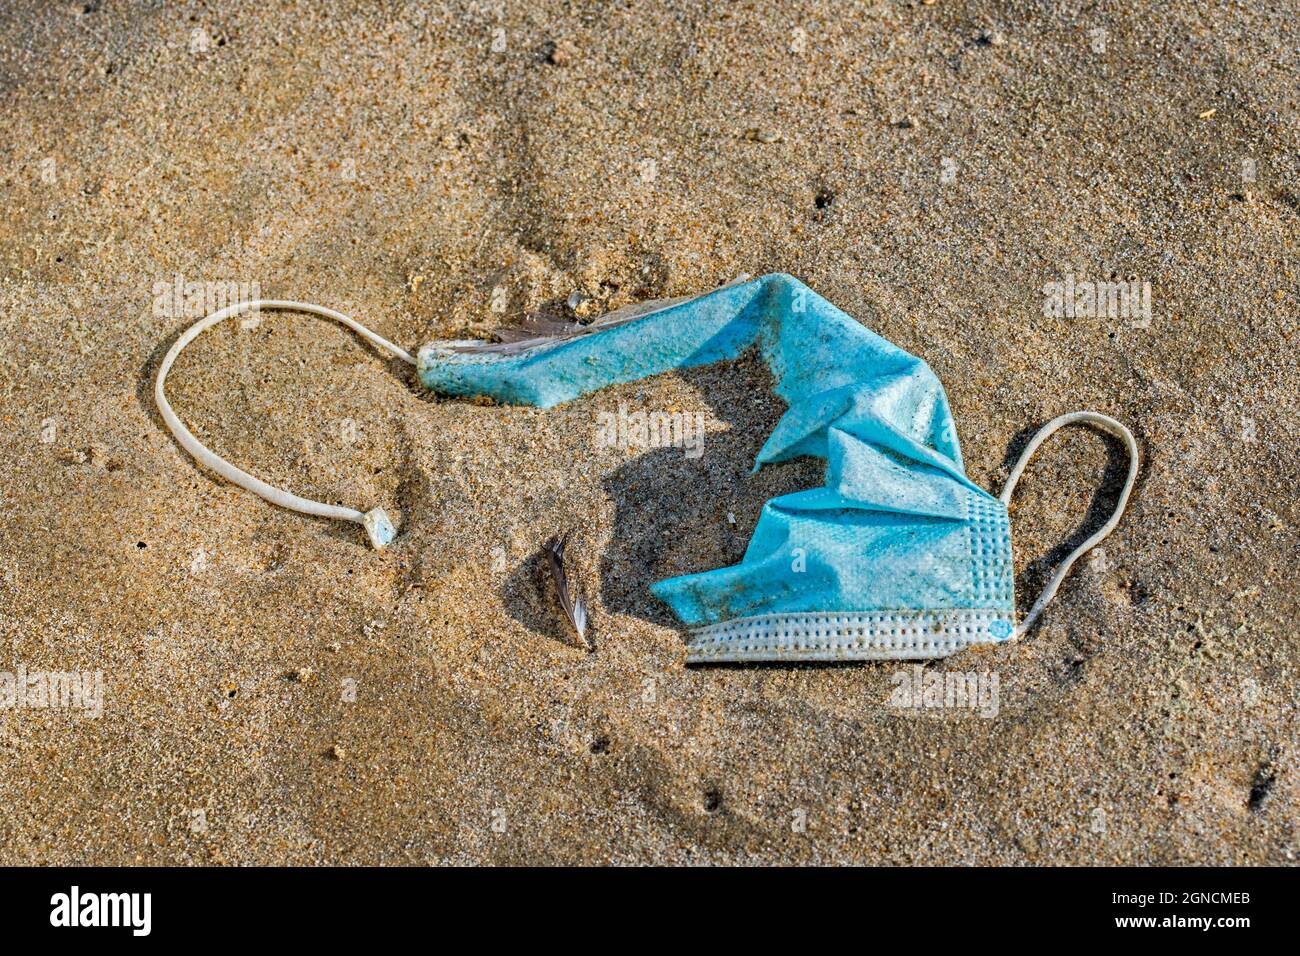 Discarded disposable facemask / face mask washed ashore, polluting sandy beach along the coast during COVID-19 / coronavirus / corona virus pandemic Stock Photo